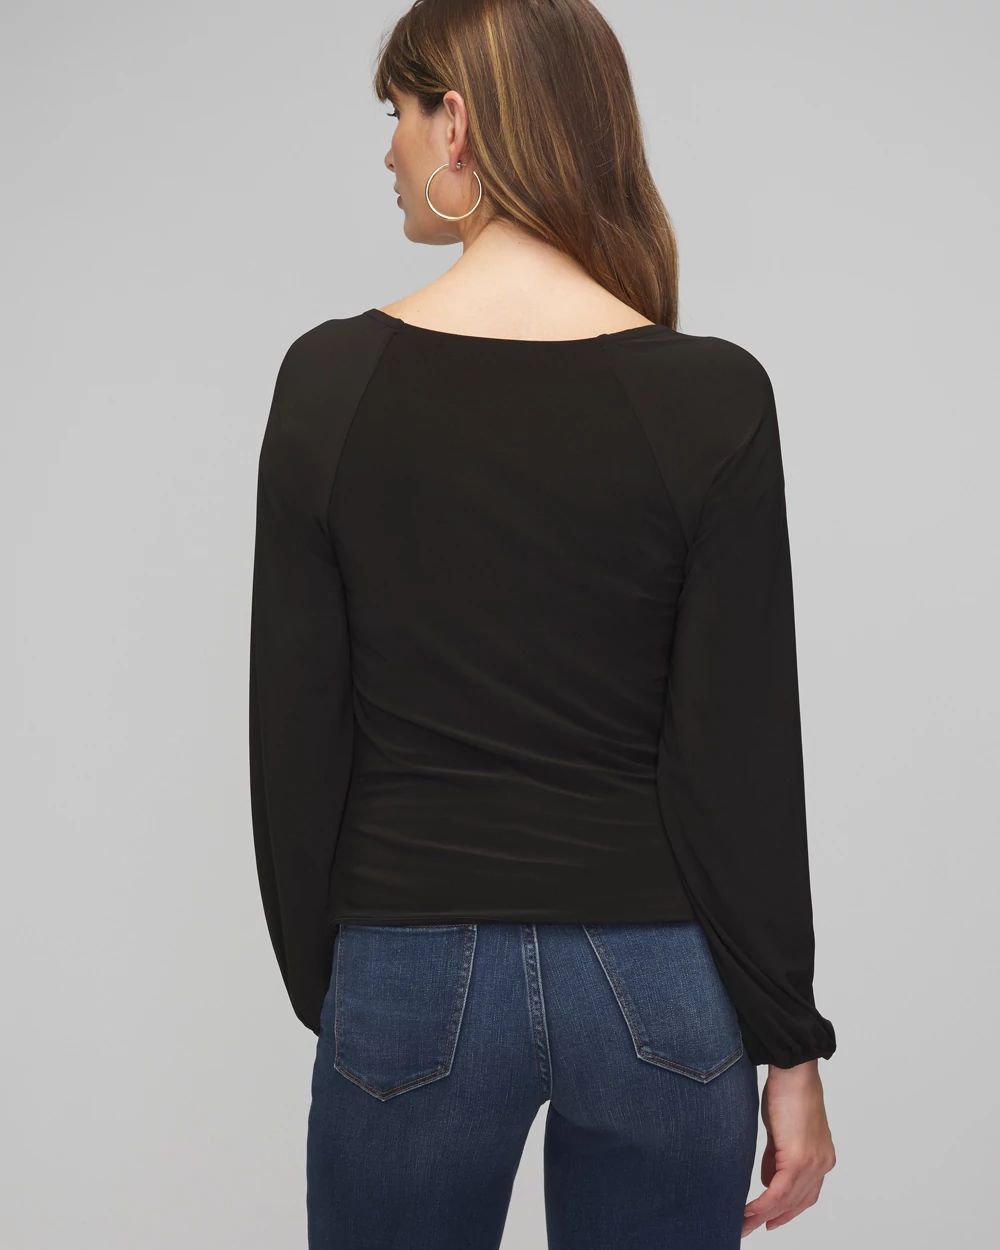 Long Sleeve Ruched Chain Matte Jersey Top click to view larger image.